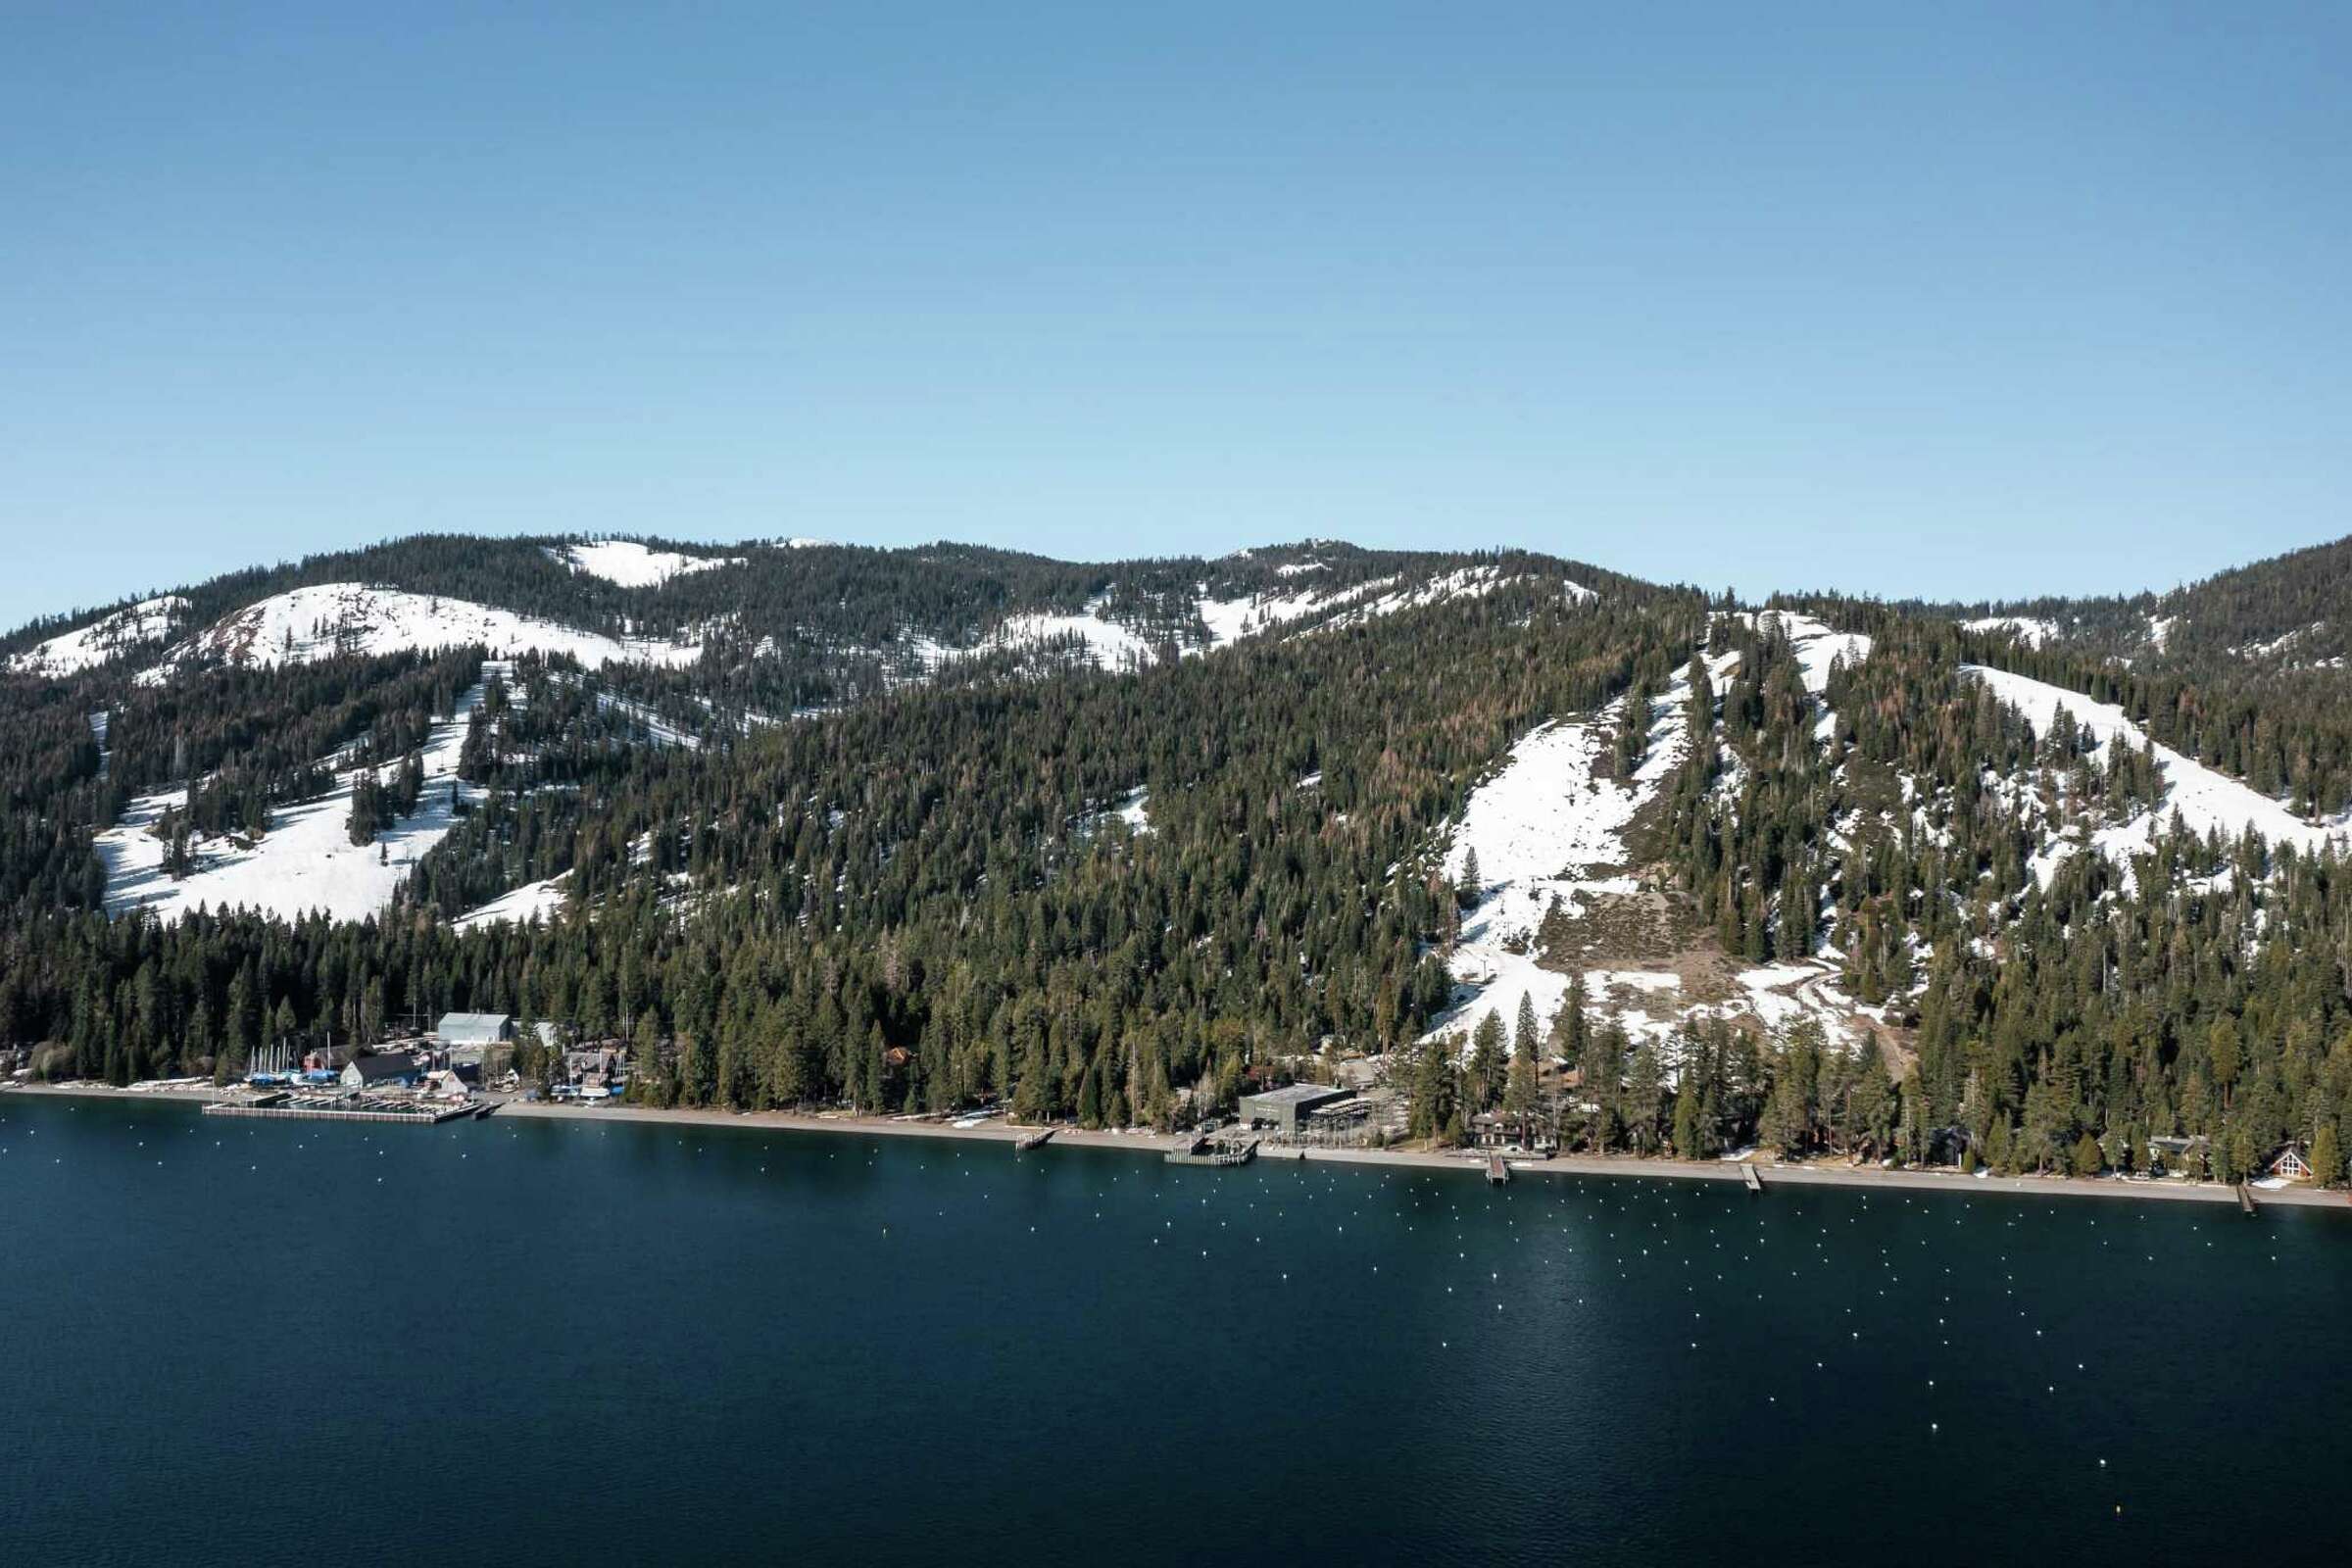 A Lake Tahoe ski resort is going private. Is this the future for small ski areas?